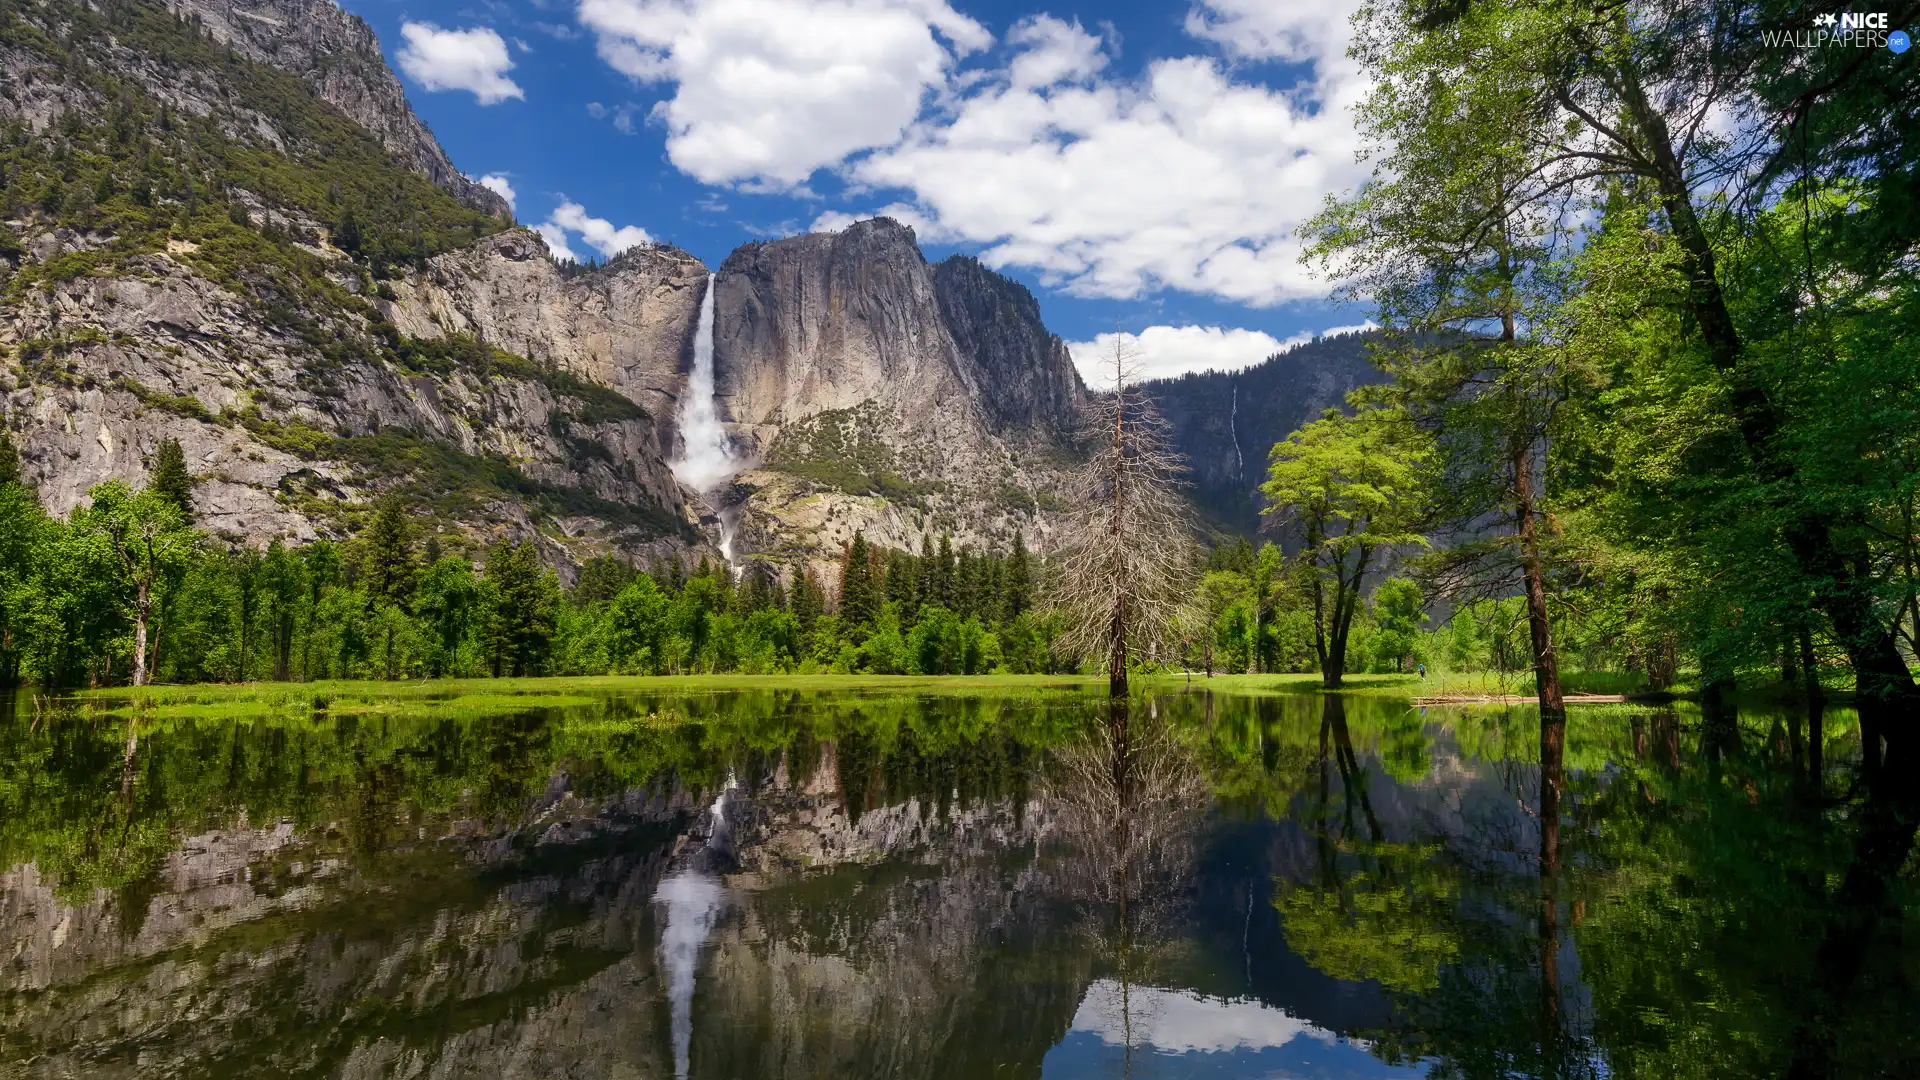 viewes, Mountains, Yosemite Falls, California, green ones, Yosemite National Park, Sierra Nevada, The United States, River, trees